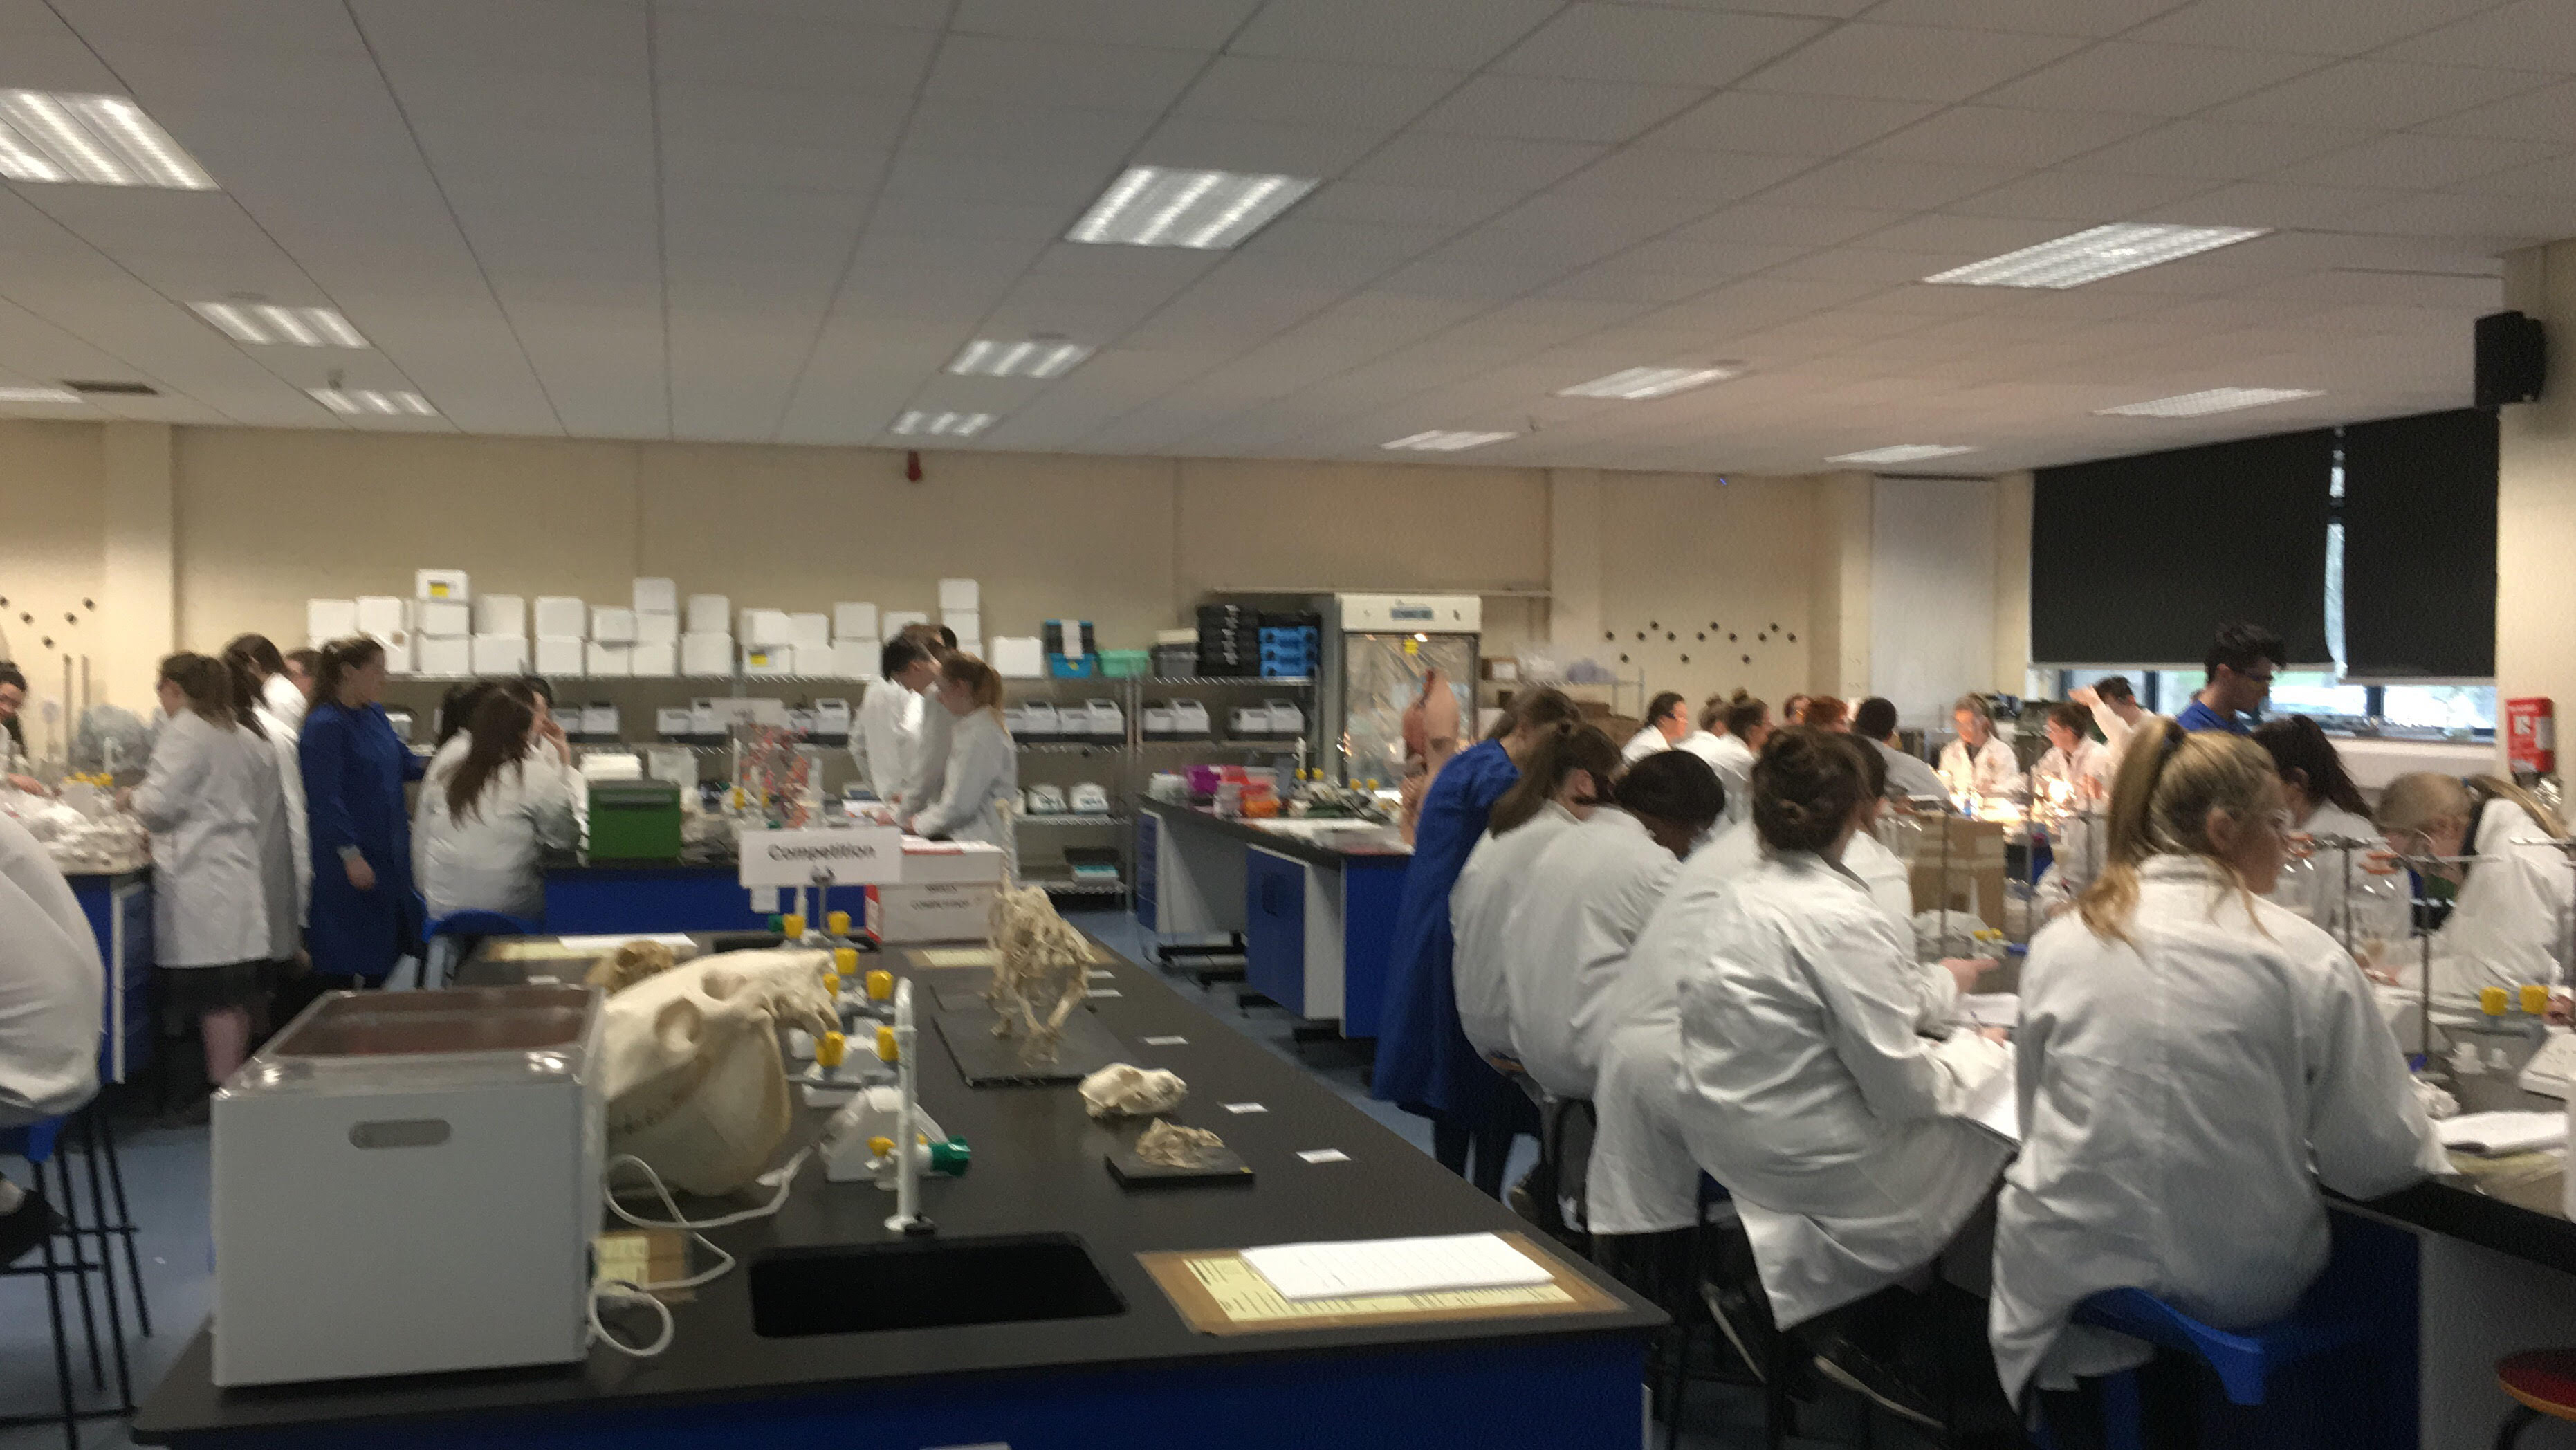 Maynooth University Schools Programme Practical Labs